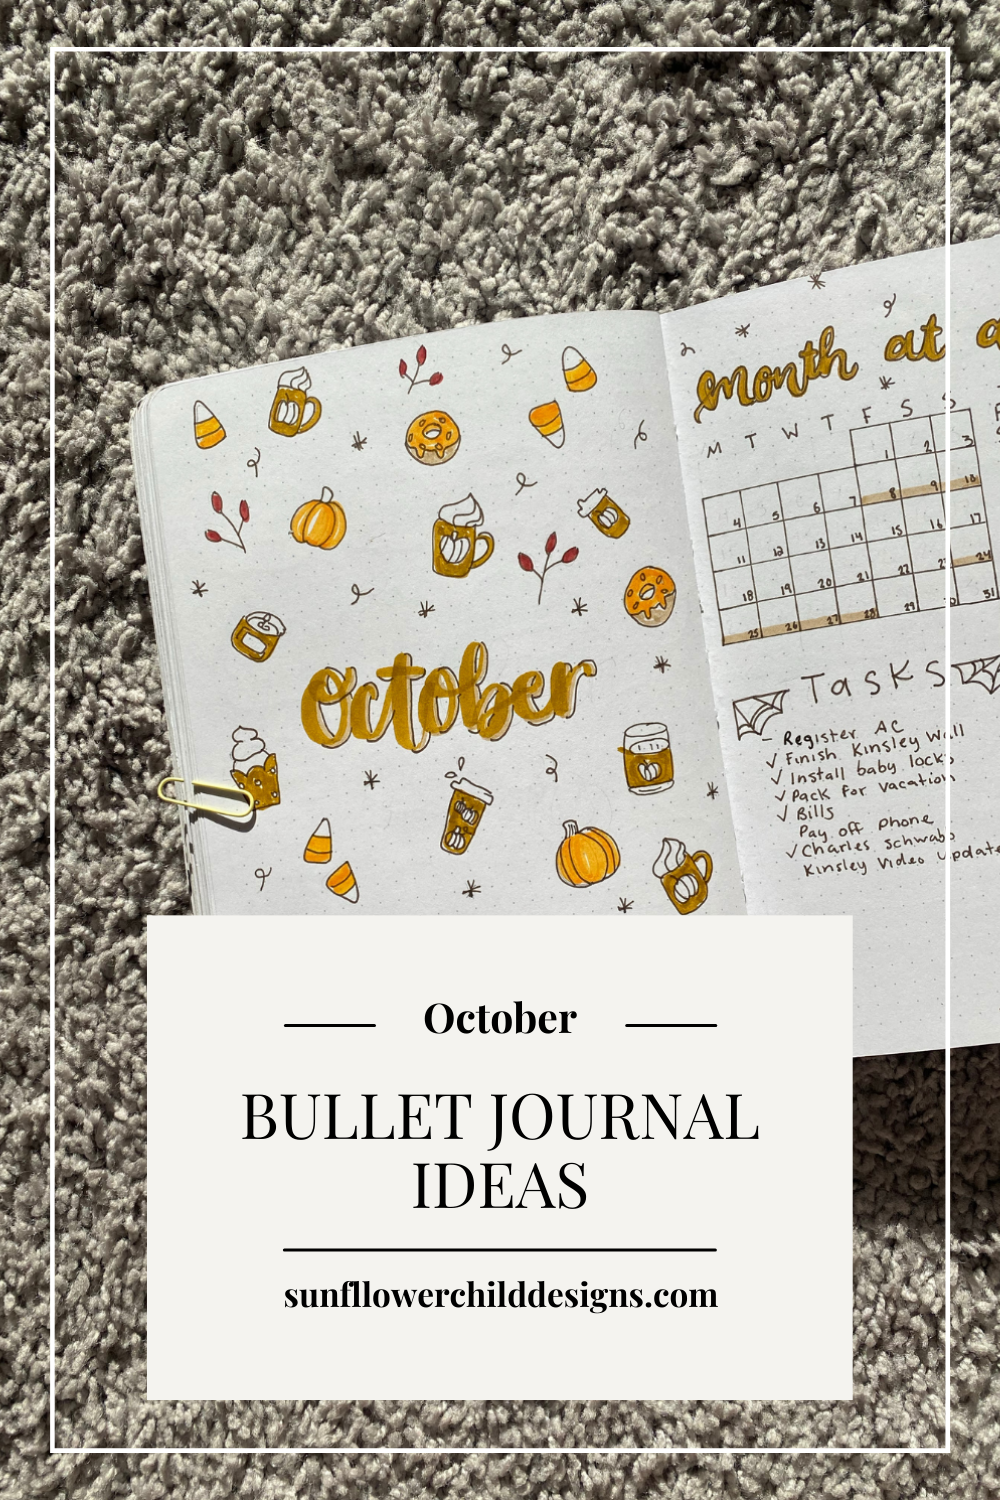 Bullet Journaling 101: How to Set up a Bullet Journal - Becoming